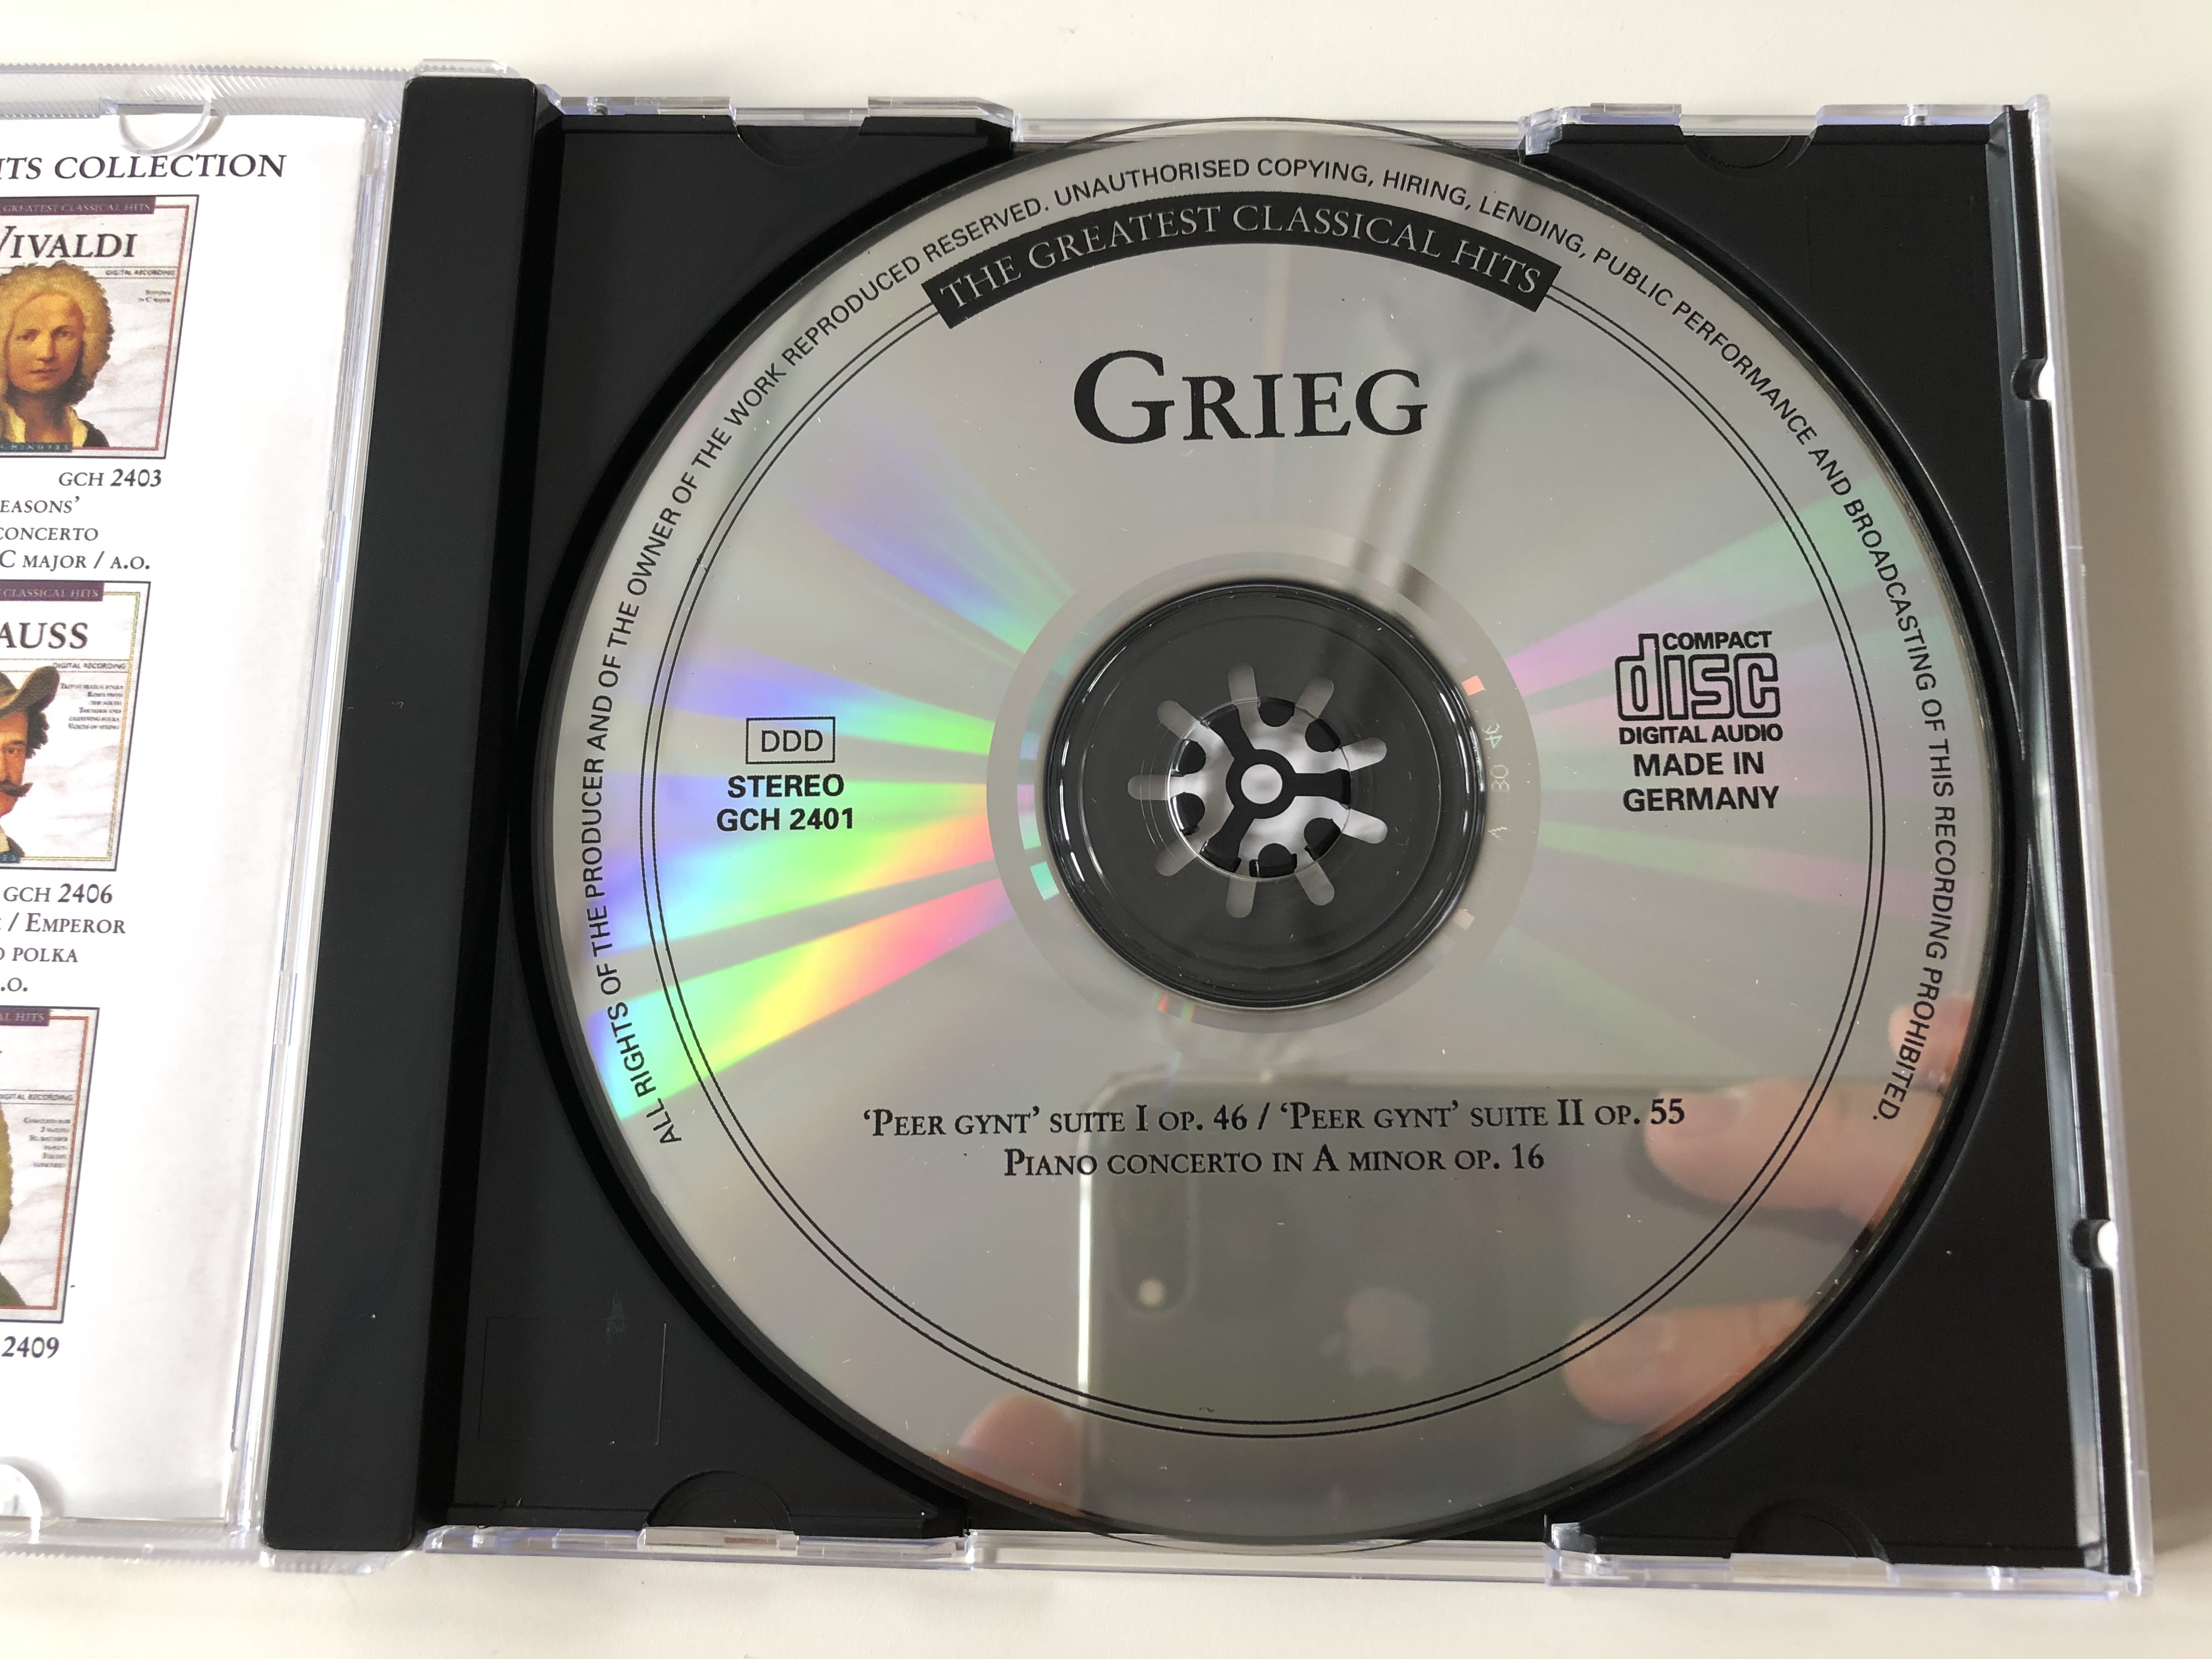 the-greatest-classical-hits-grieg-peer-gynt-suite-i-op.-46-peer-gynt-suite-ii-op.-55-piano-concerto-in-a-minor-op.-16-selcor-ltd.-audio-cd-1991-stereo-gch-2401-3-.jpg